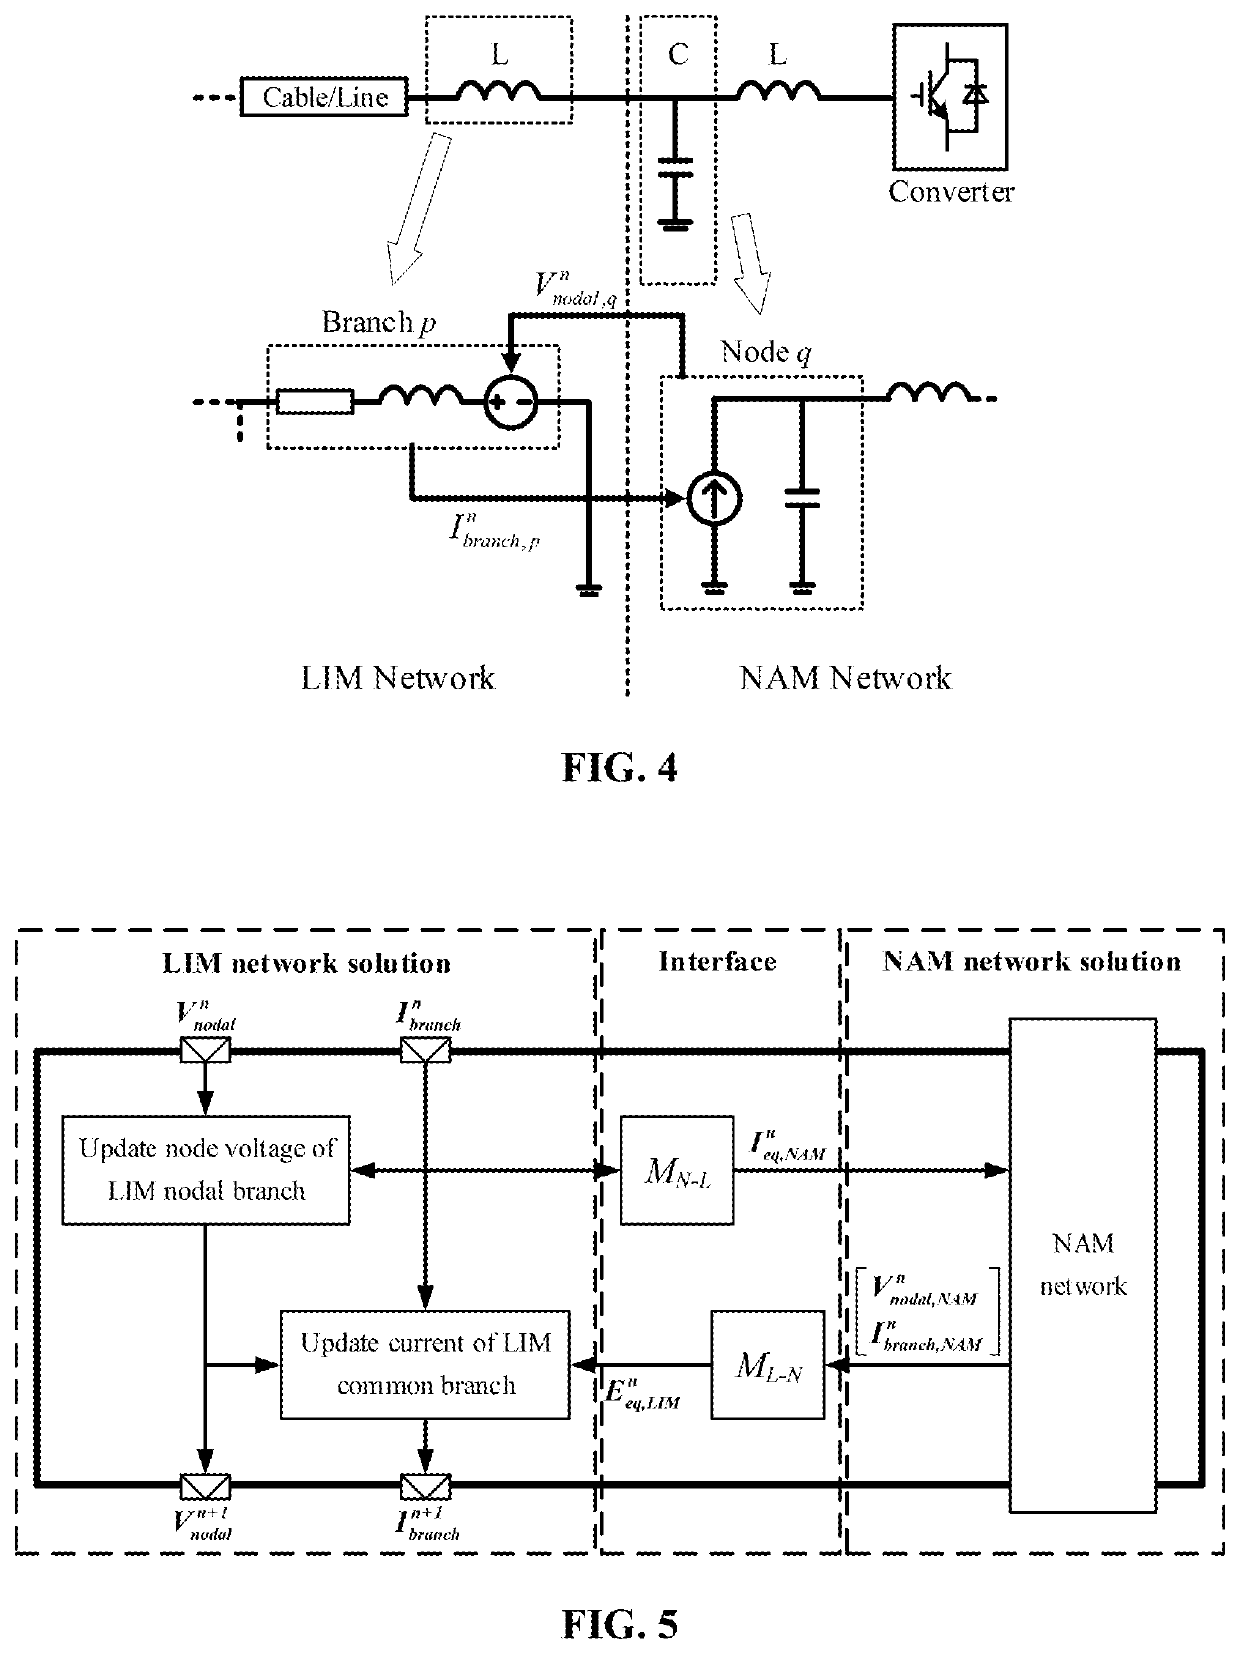 Hybrid electromagnetic transient simulation method for microgrid real-time simulation